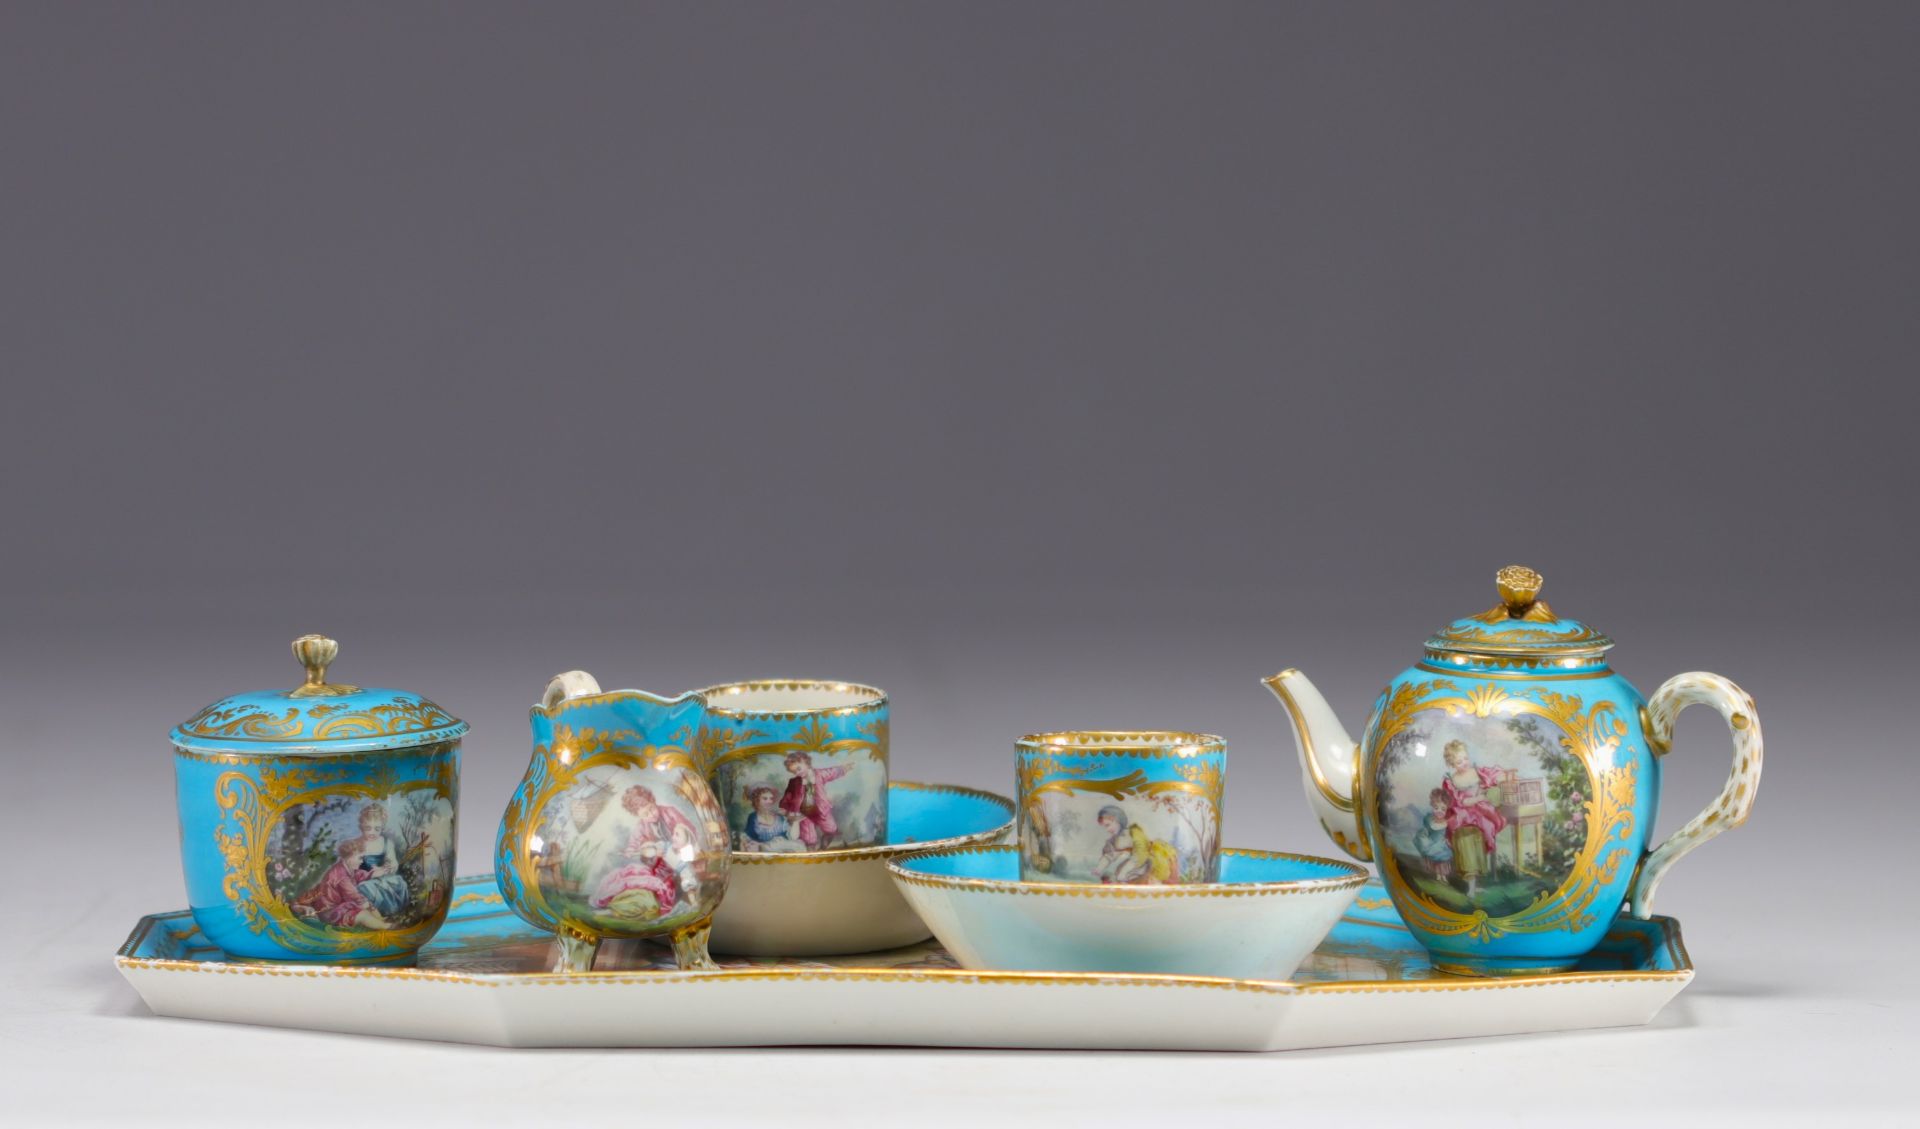 Tete a tete" service in Sevres porcelain on a celestial blue background. - Image 10 of 10